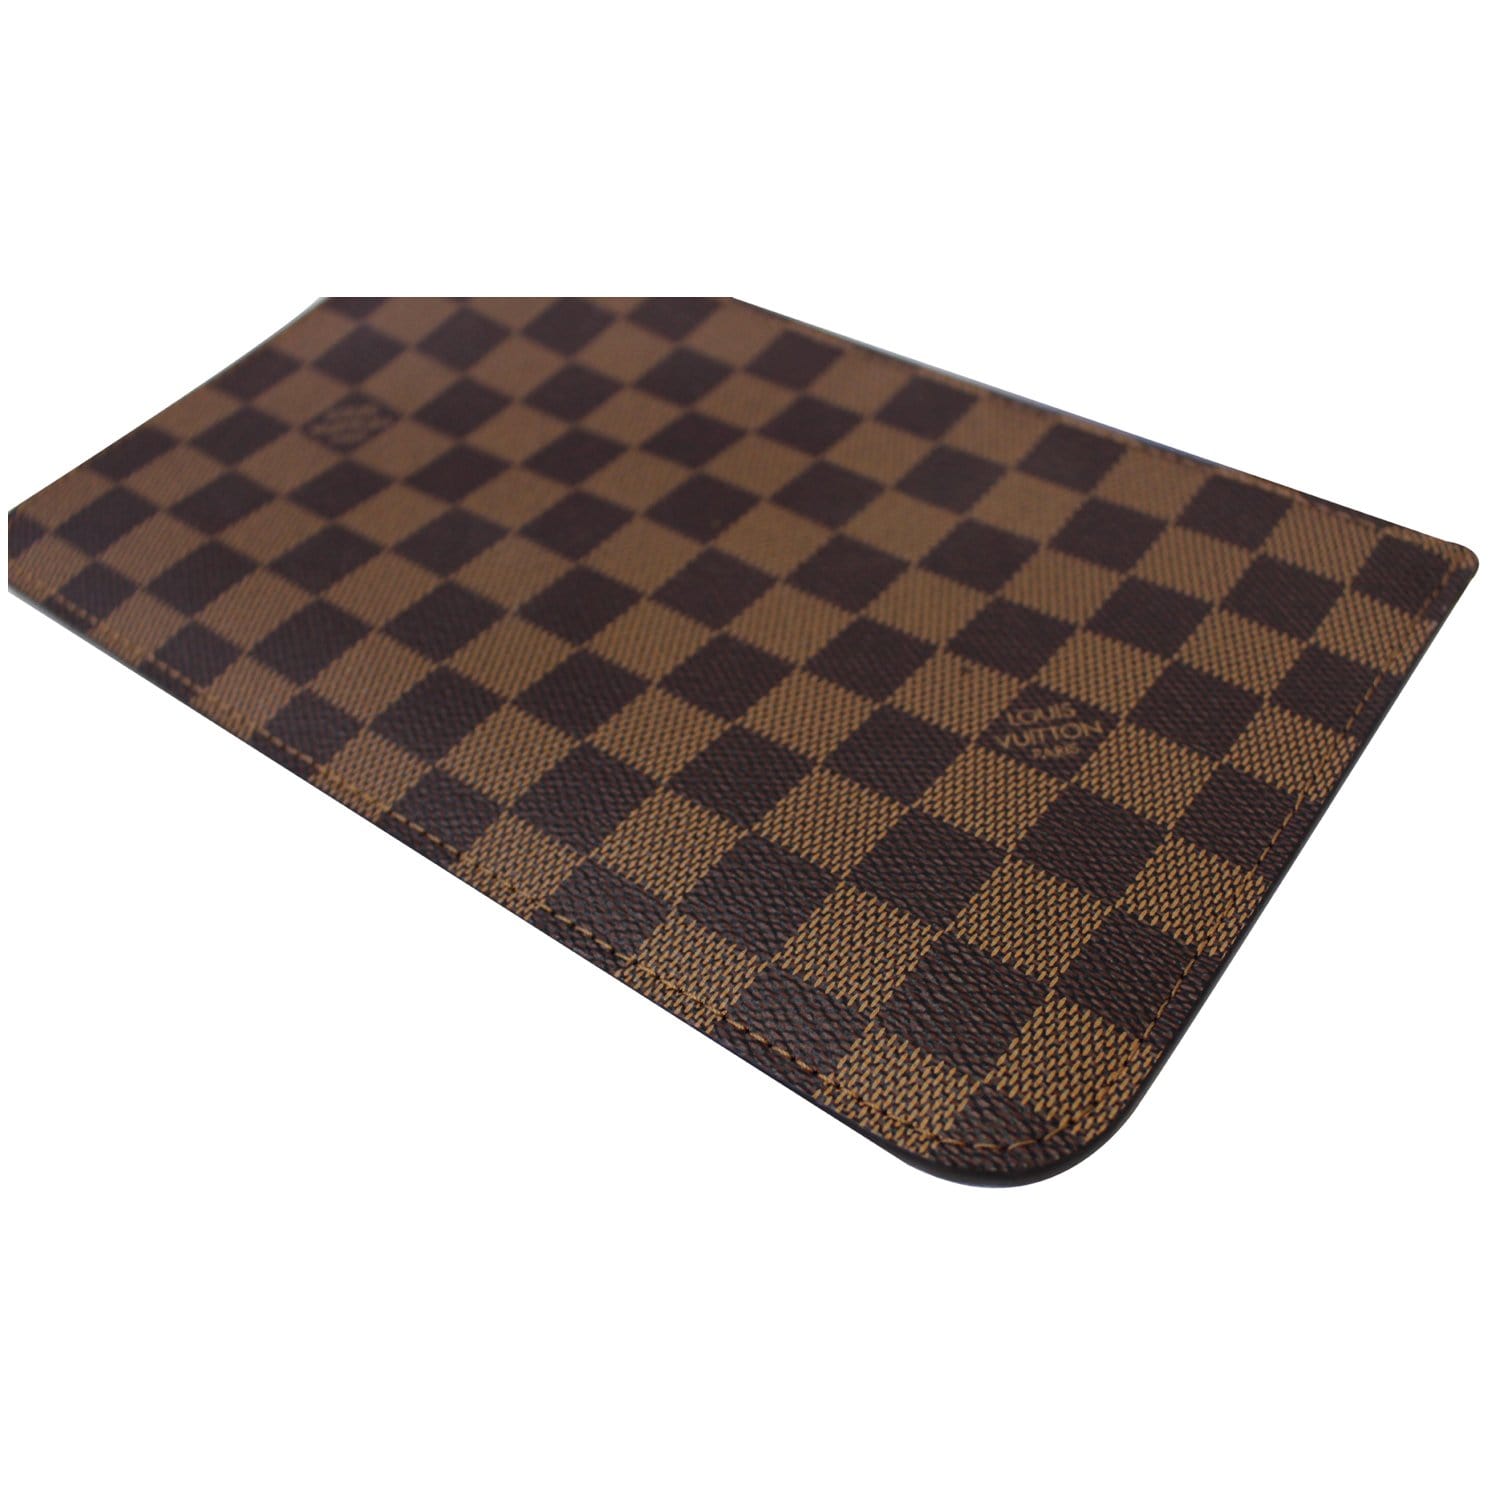 Louis Vuitton Neverfull Limited Edition Wallpapers  Louis vuitton pattern, Louis  vuitton background, Louis vuitton neverfull